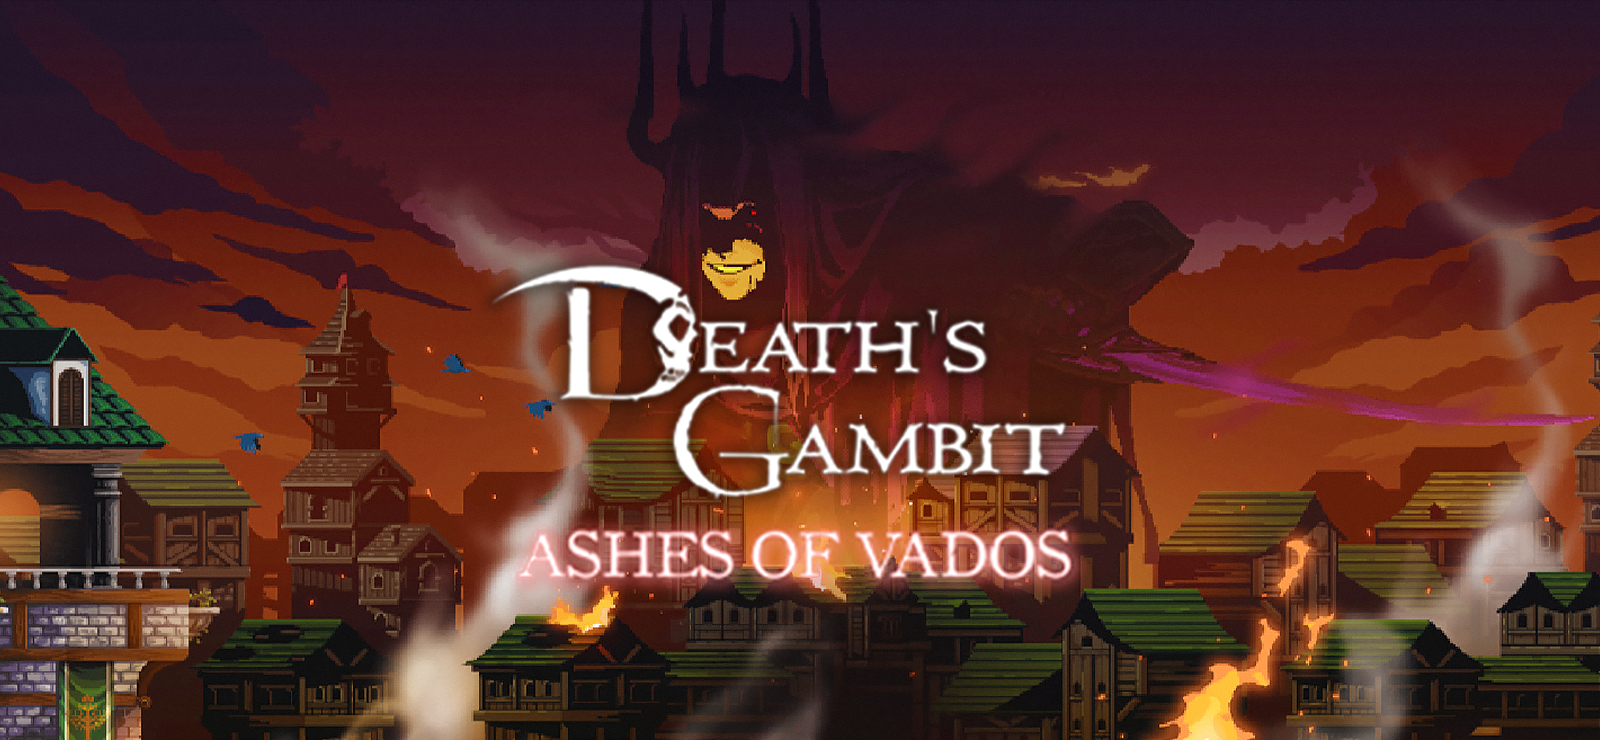 Death's Gambit: Afterlife - Ashes Of Vados